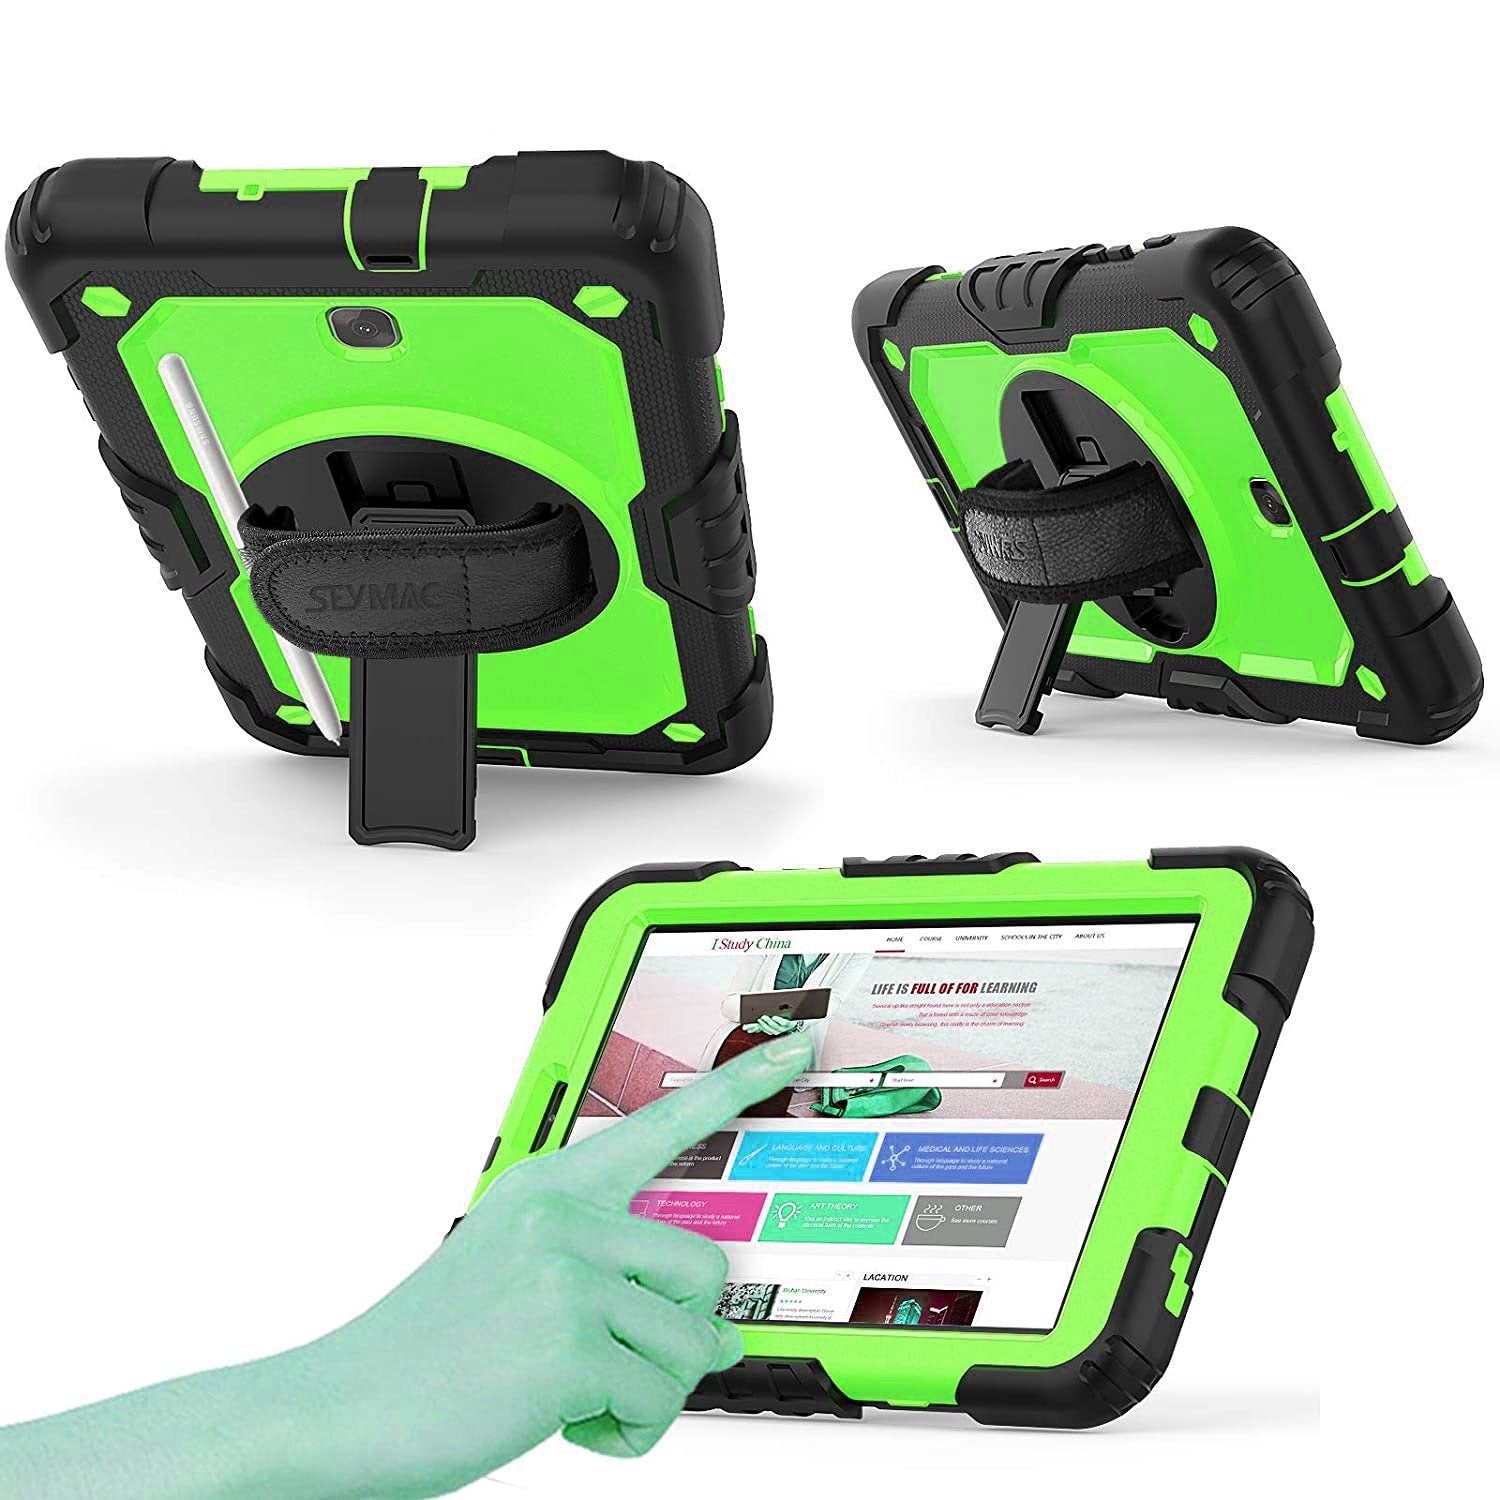 SEYMAC stock Case for SM-T387, 2018 Version of Galaxy Tab A 8.0, (Not fit Other Galaxy Tab A 8.0) - GREEN - e4cents